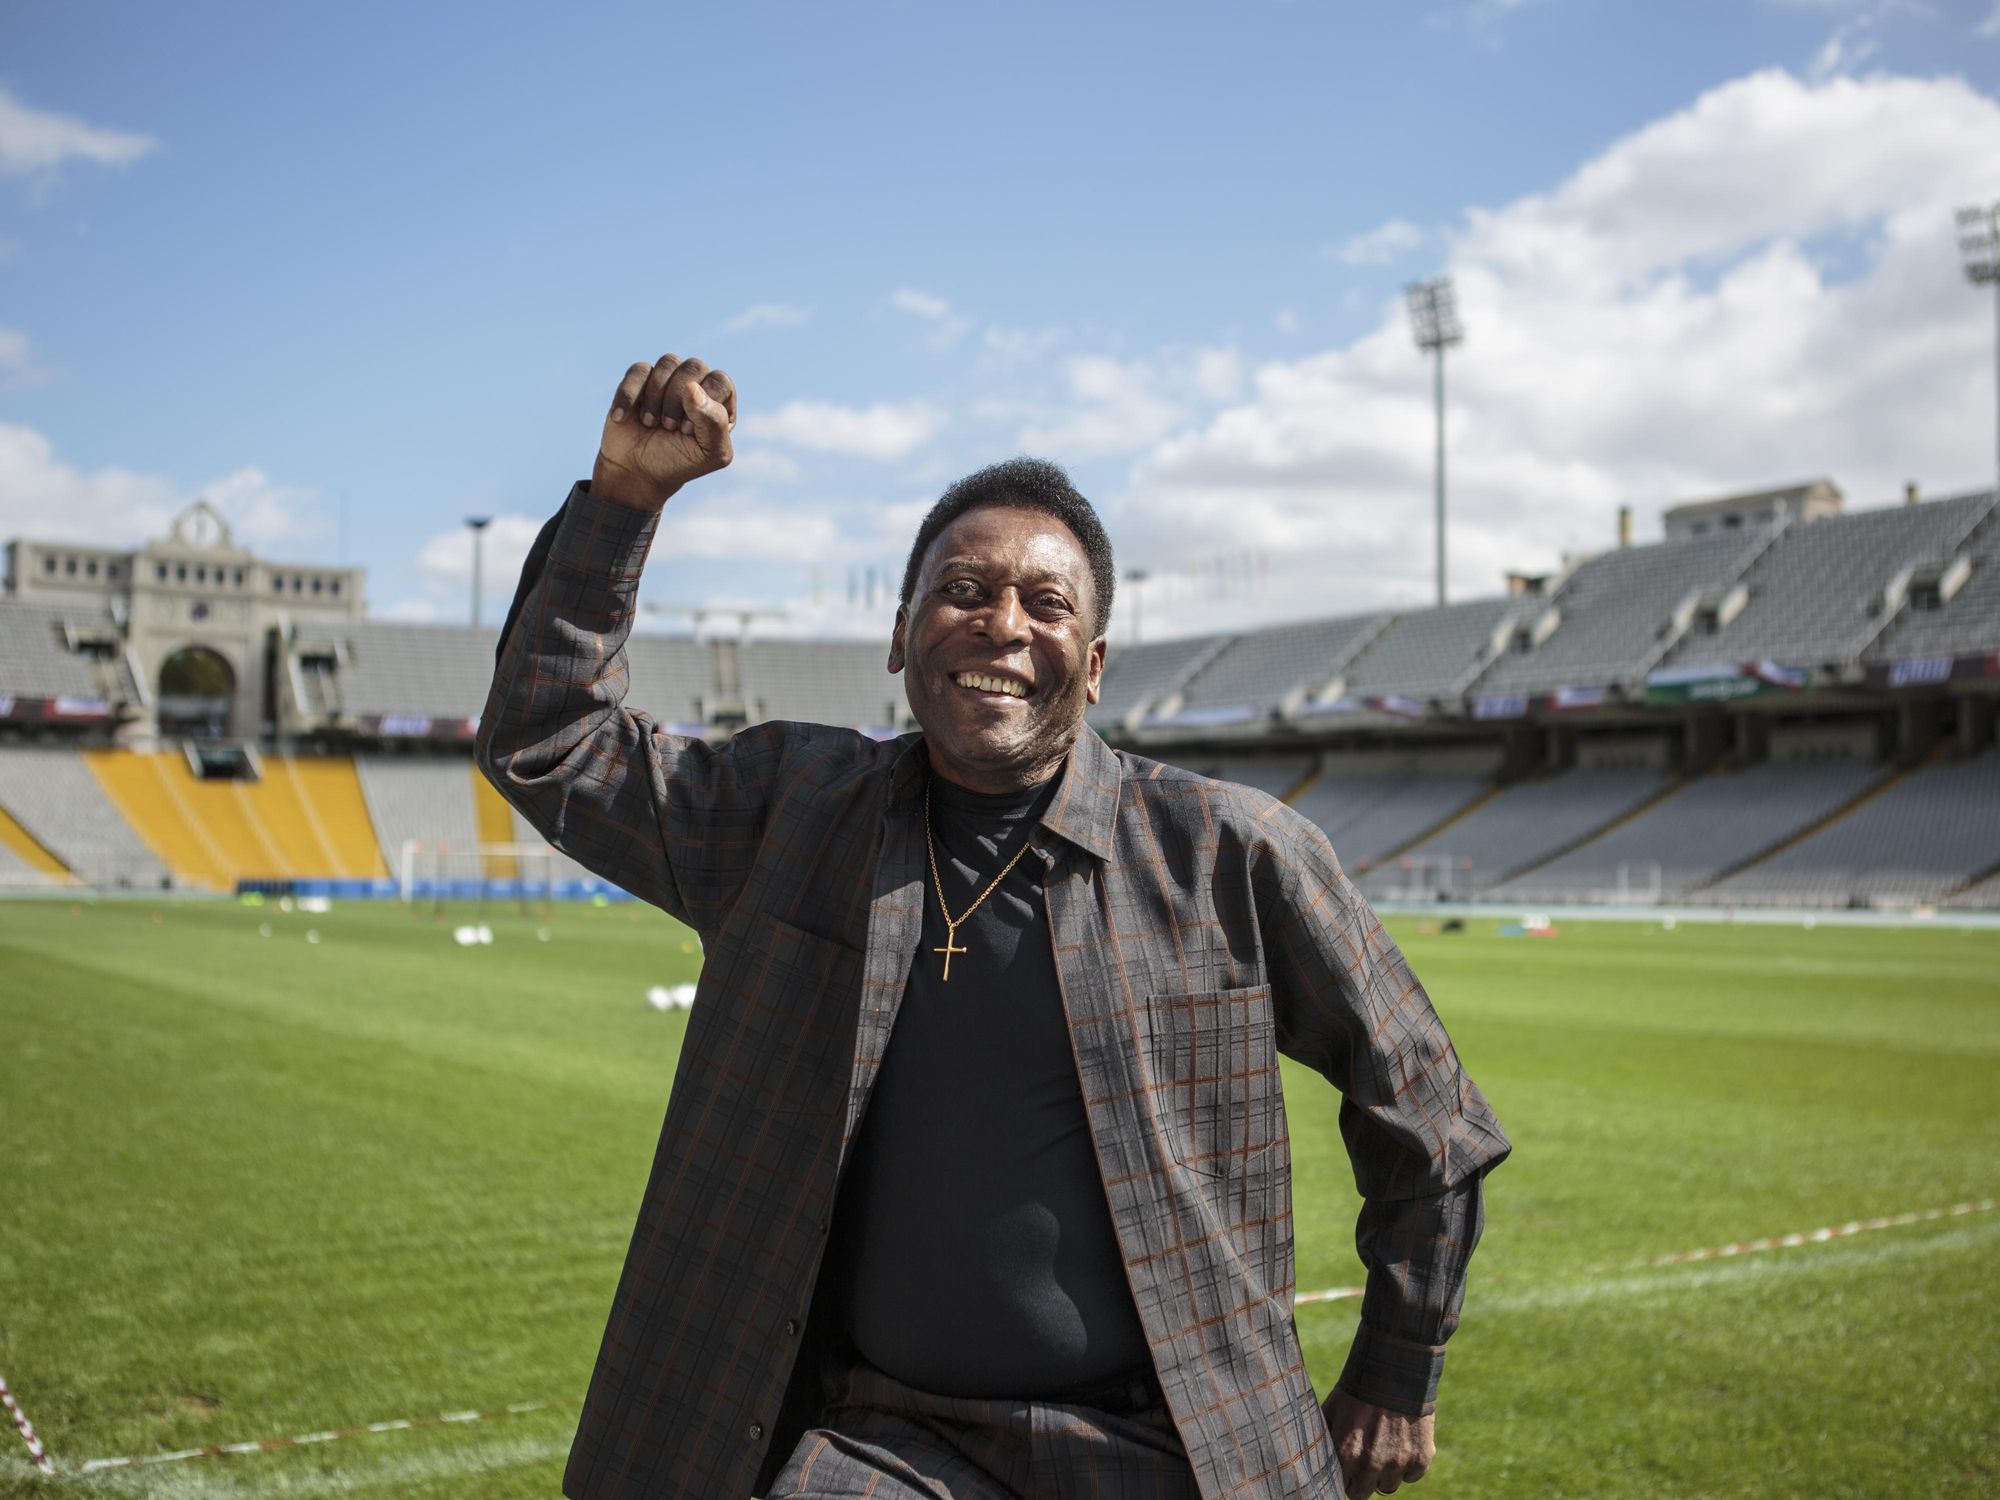 Cape Verde Plans to Rename Their National Stadium in Honor of Pelé